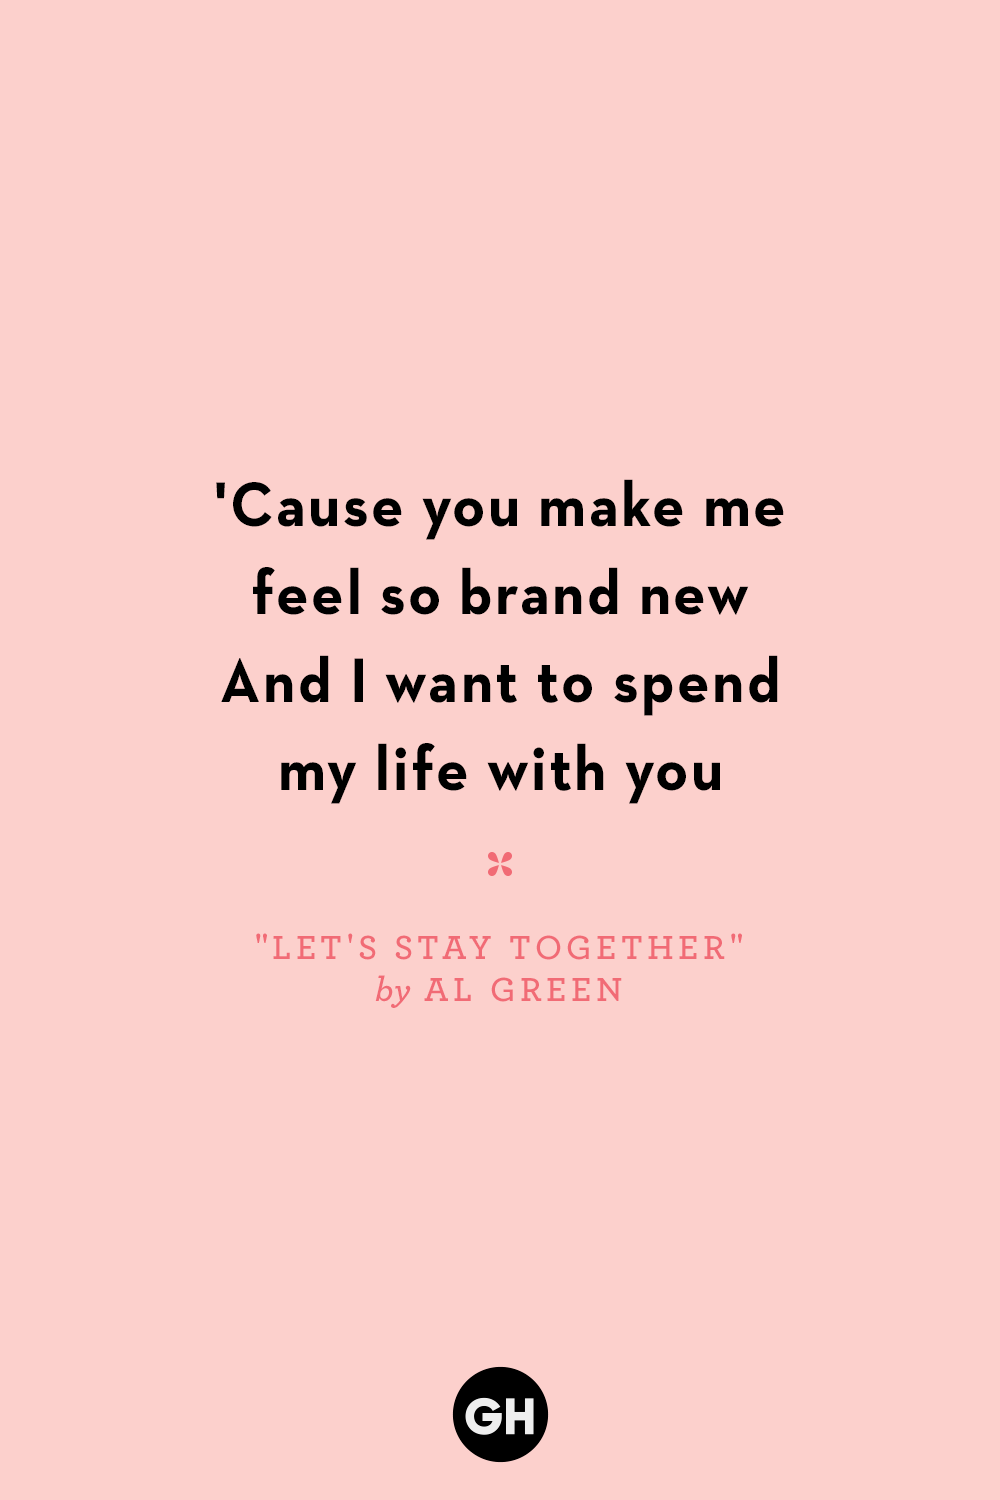 cute love song quotes